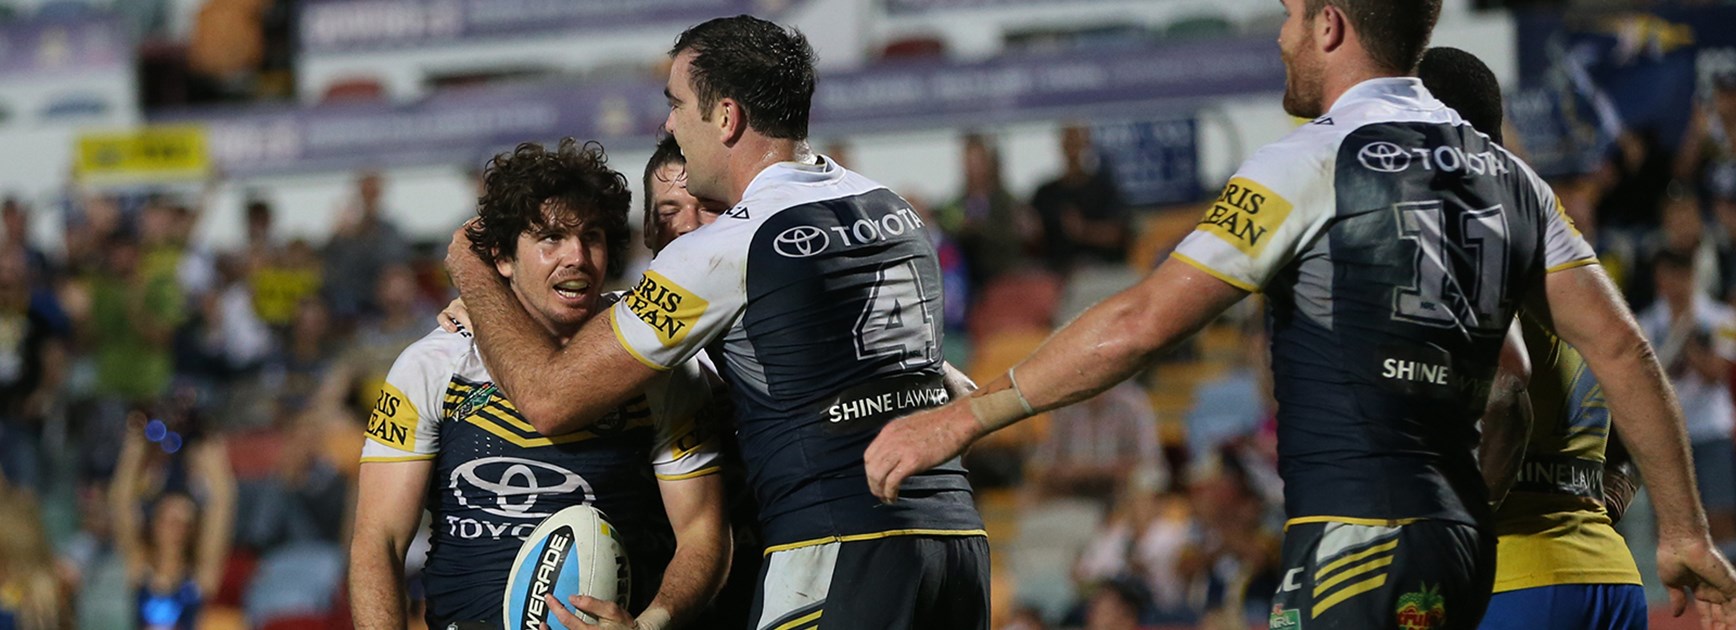 Cowboys players celebrate another try against the Eels in Round 20.